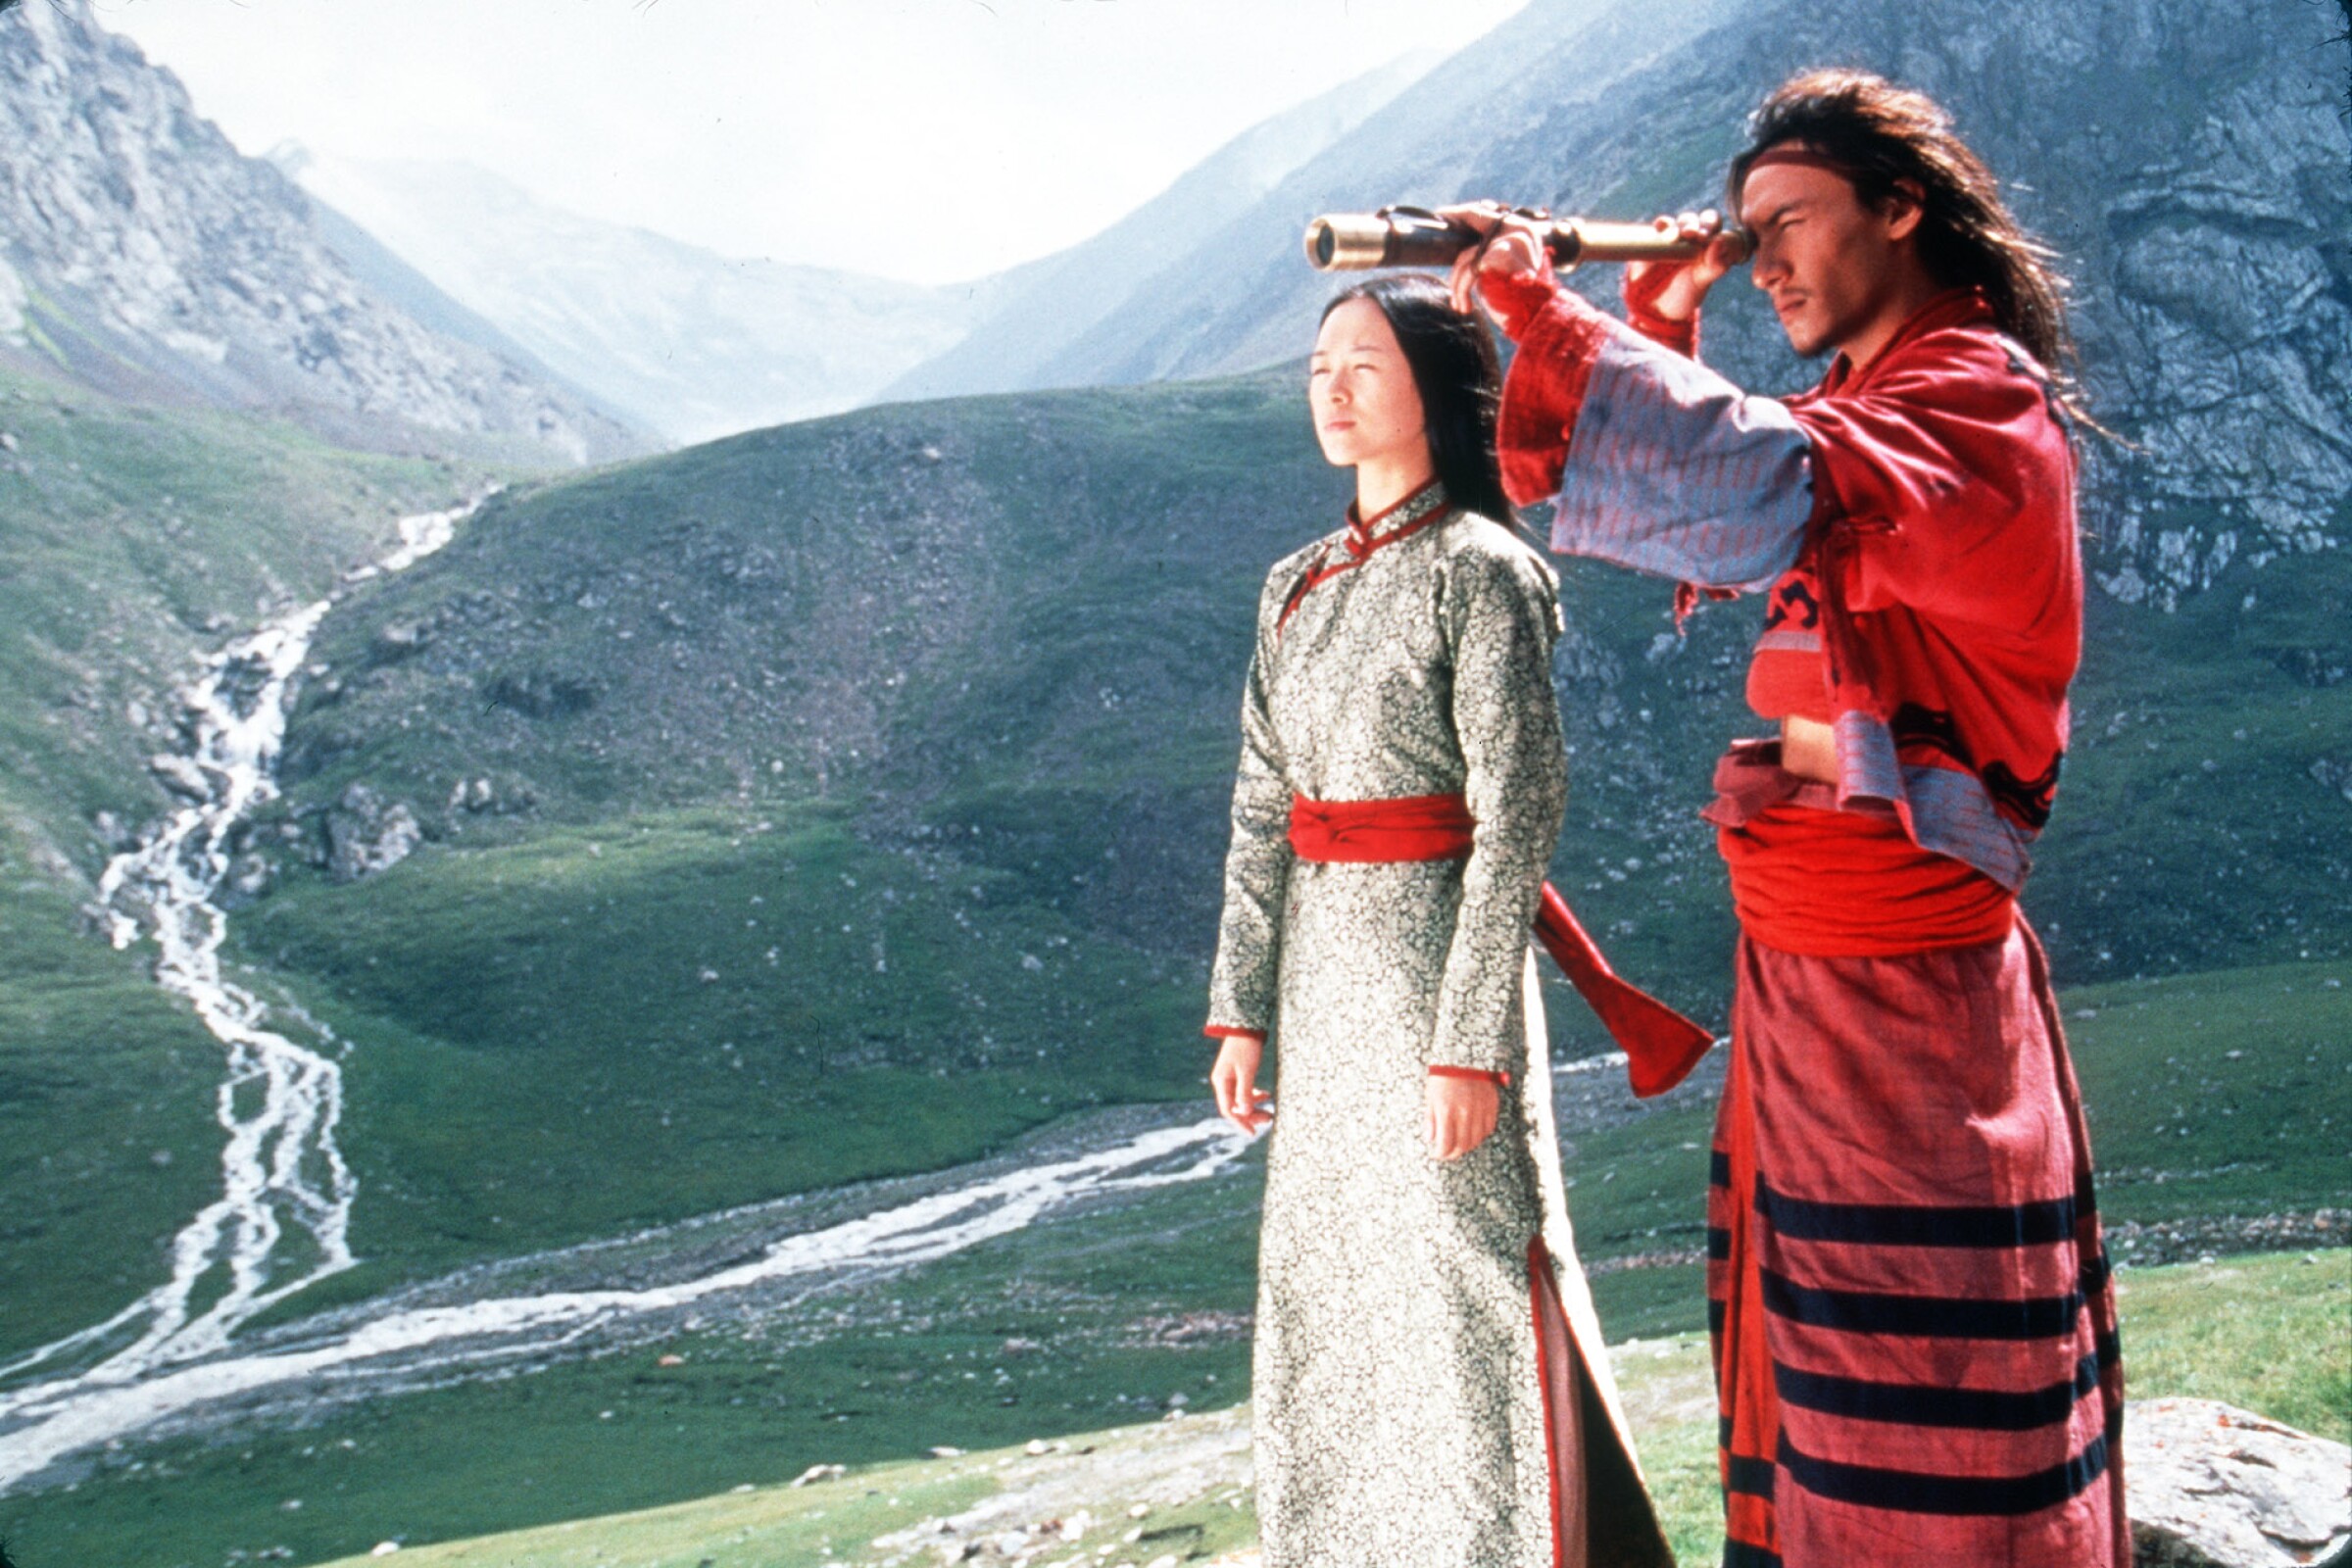 Zhang Ziyi and Chang Chen, in traditional dress, stand on a mountainside.